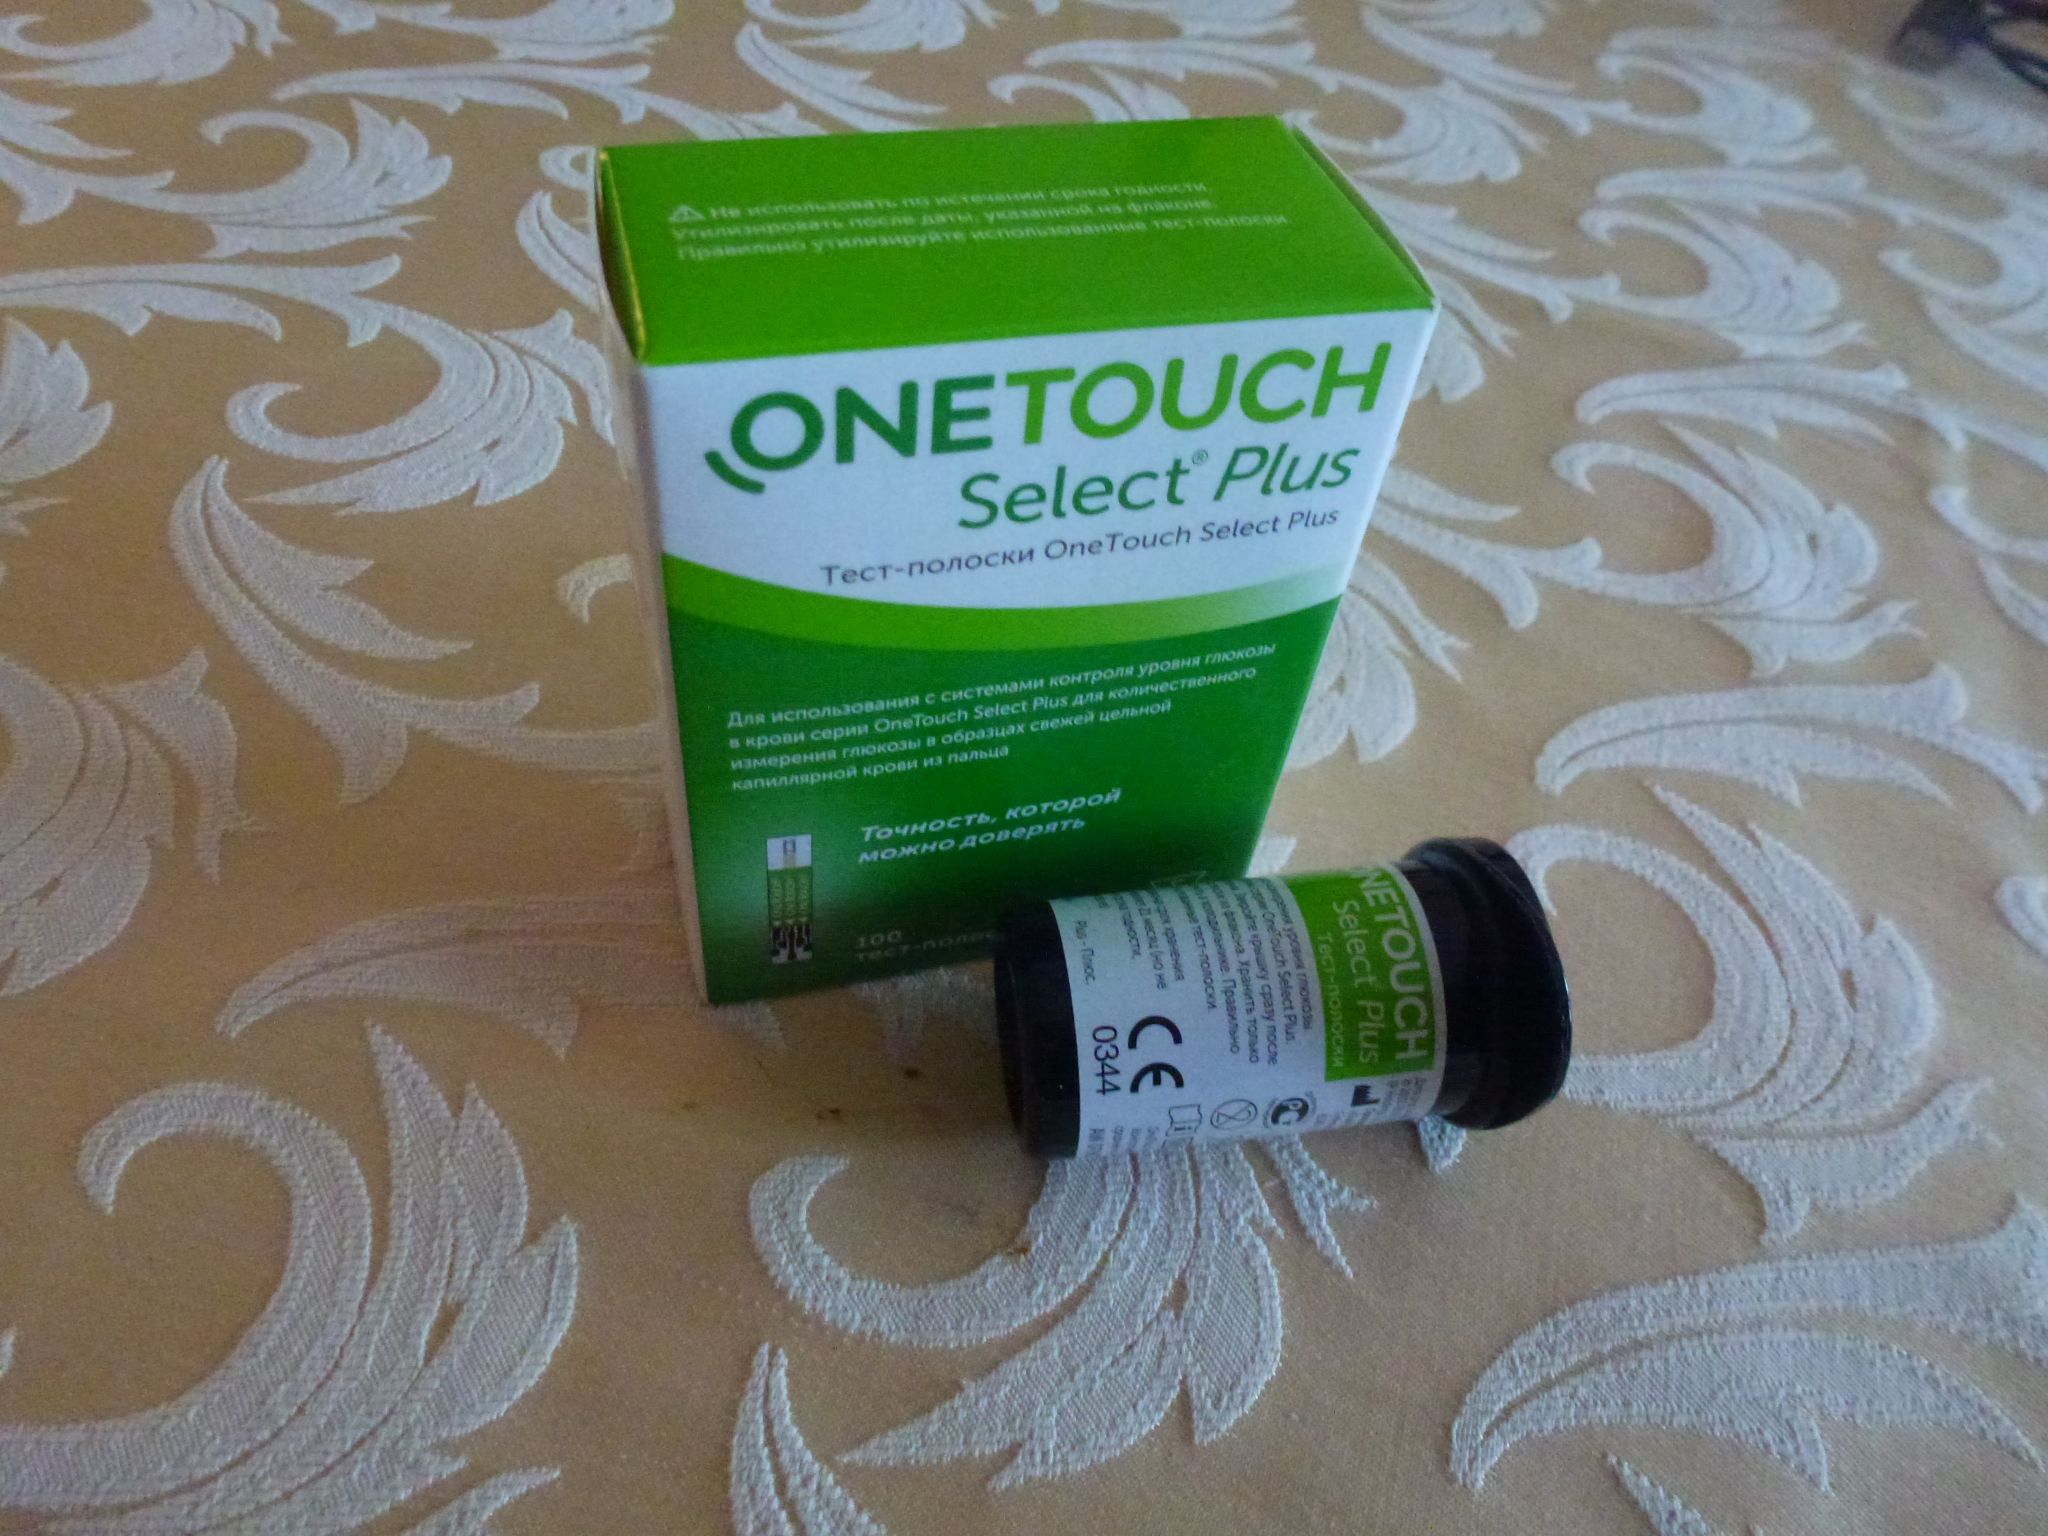 One touch select 100 тест полосок. One Touch select Plus 100. One Touch select Plus полоски 100. Тест-полоски ONETOUCH select Plus 100 шт. Тест-полоски ONETOUCH select Plus №50.